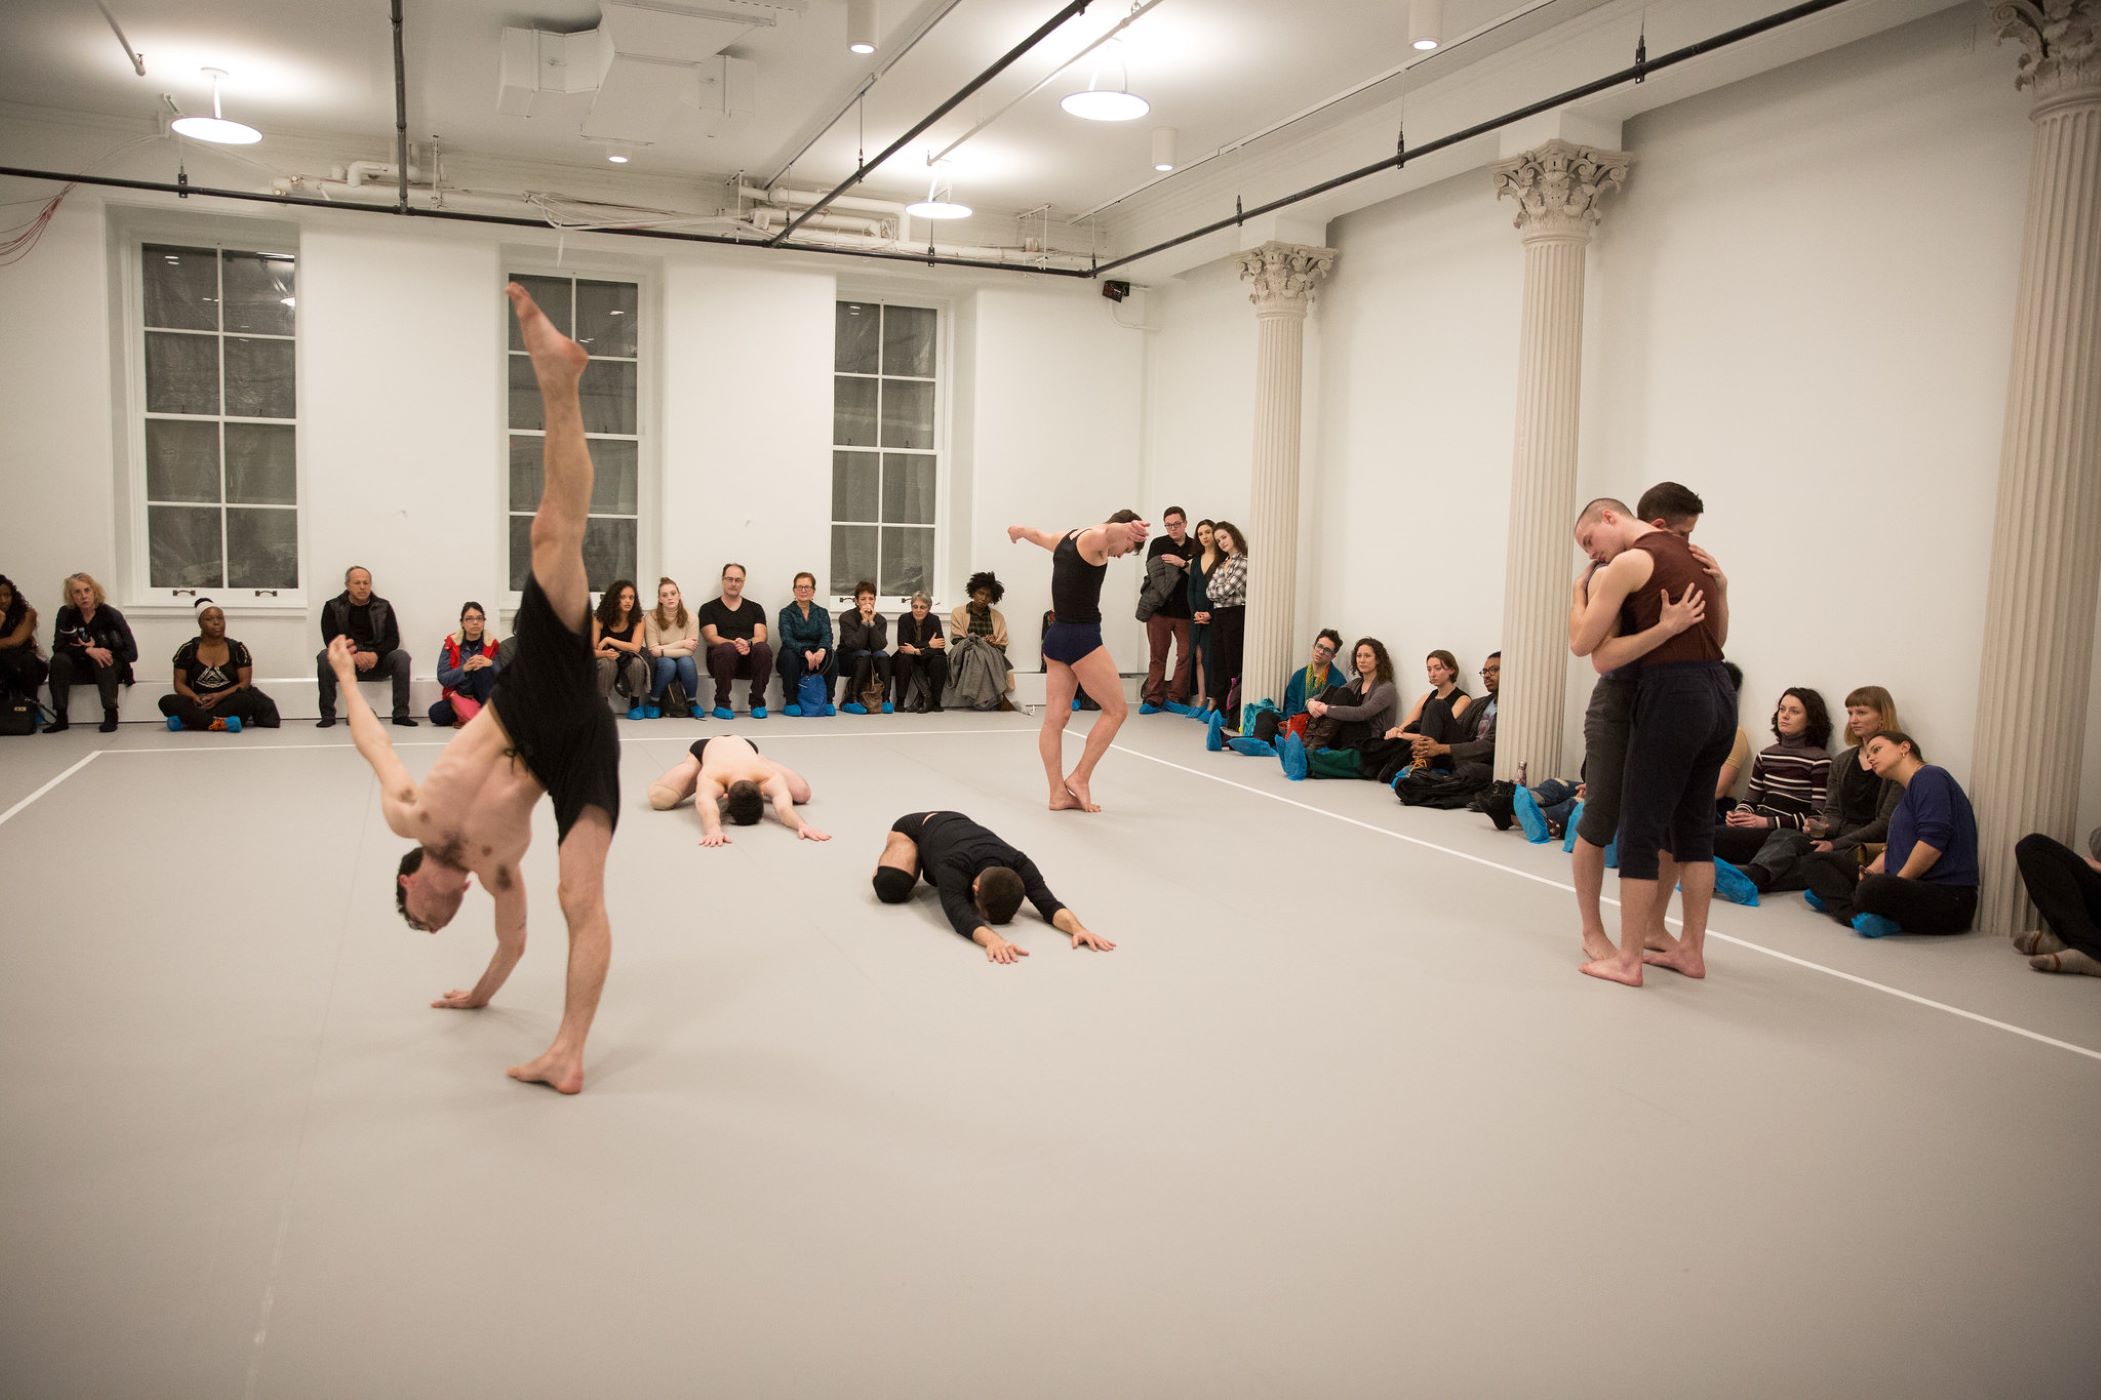 large, open dance studio with many dancers in different positions